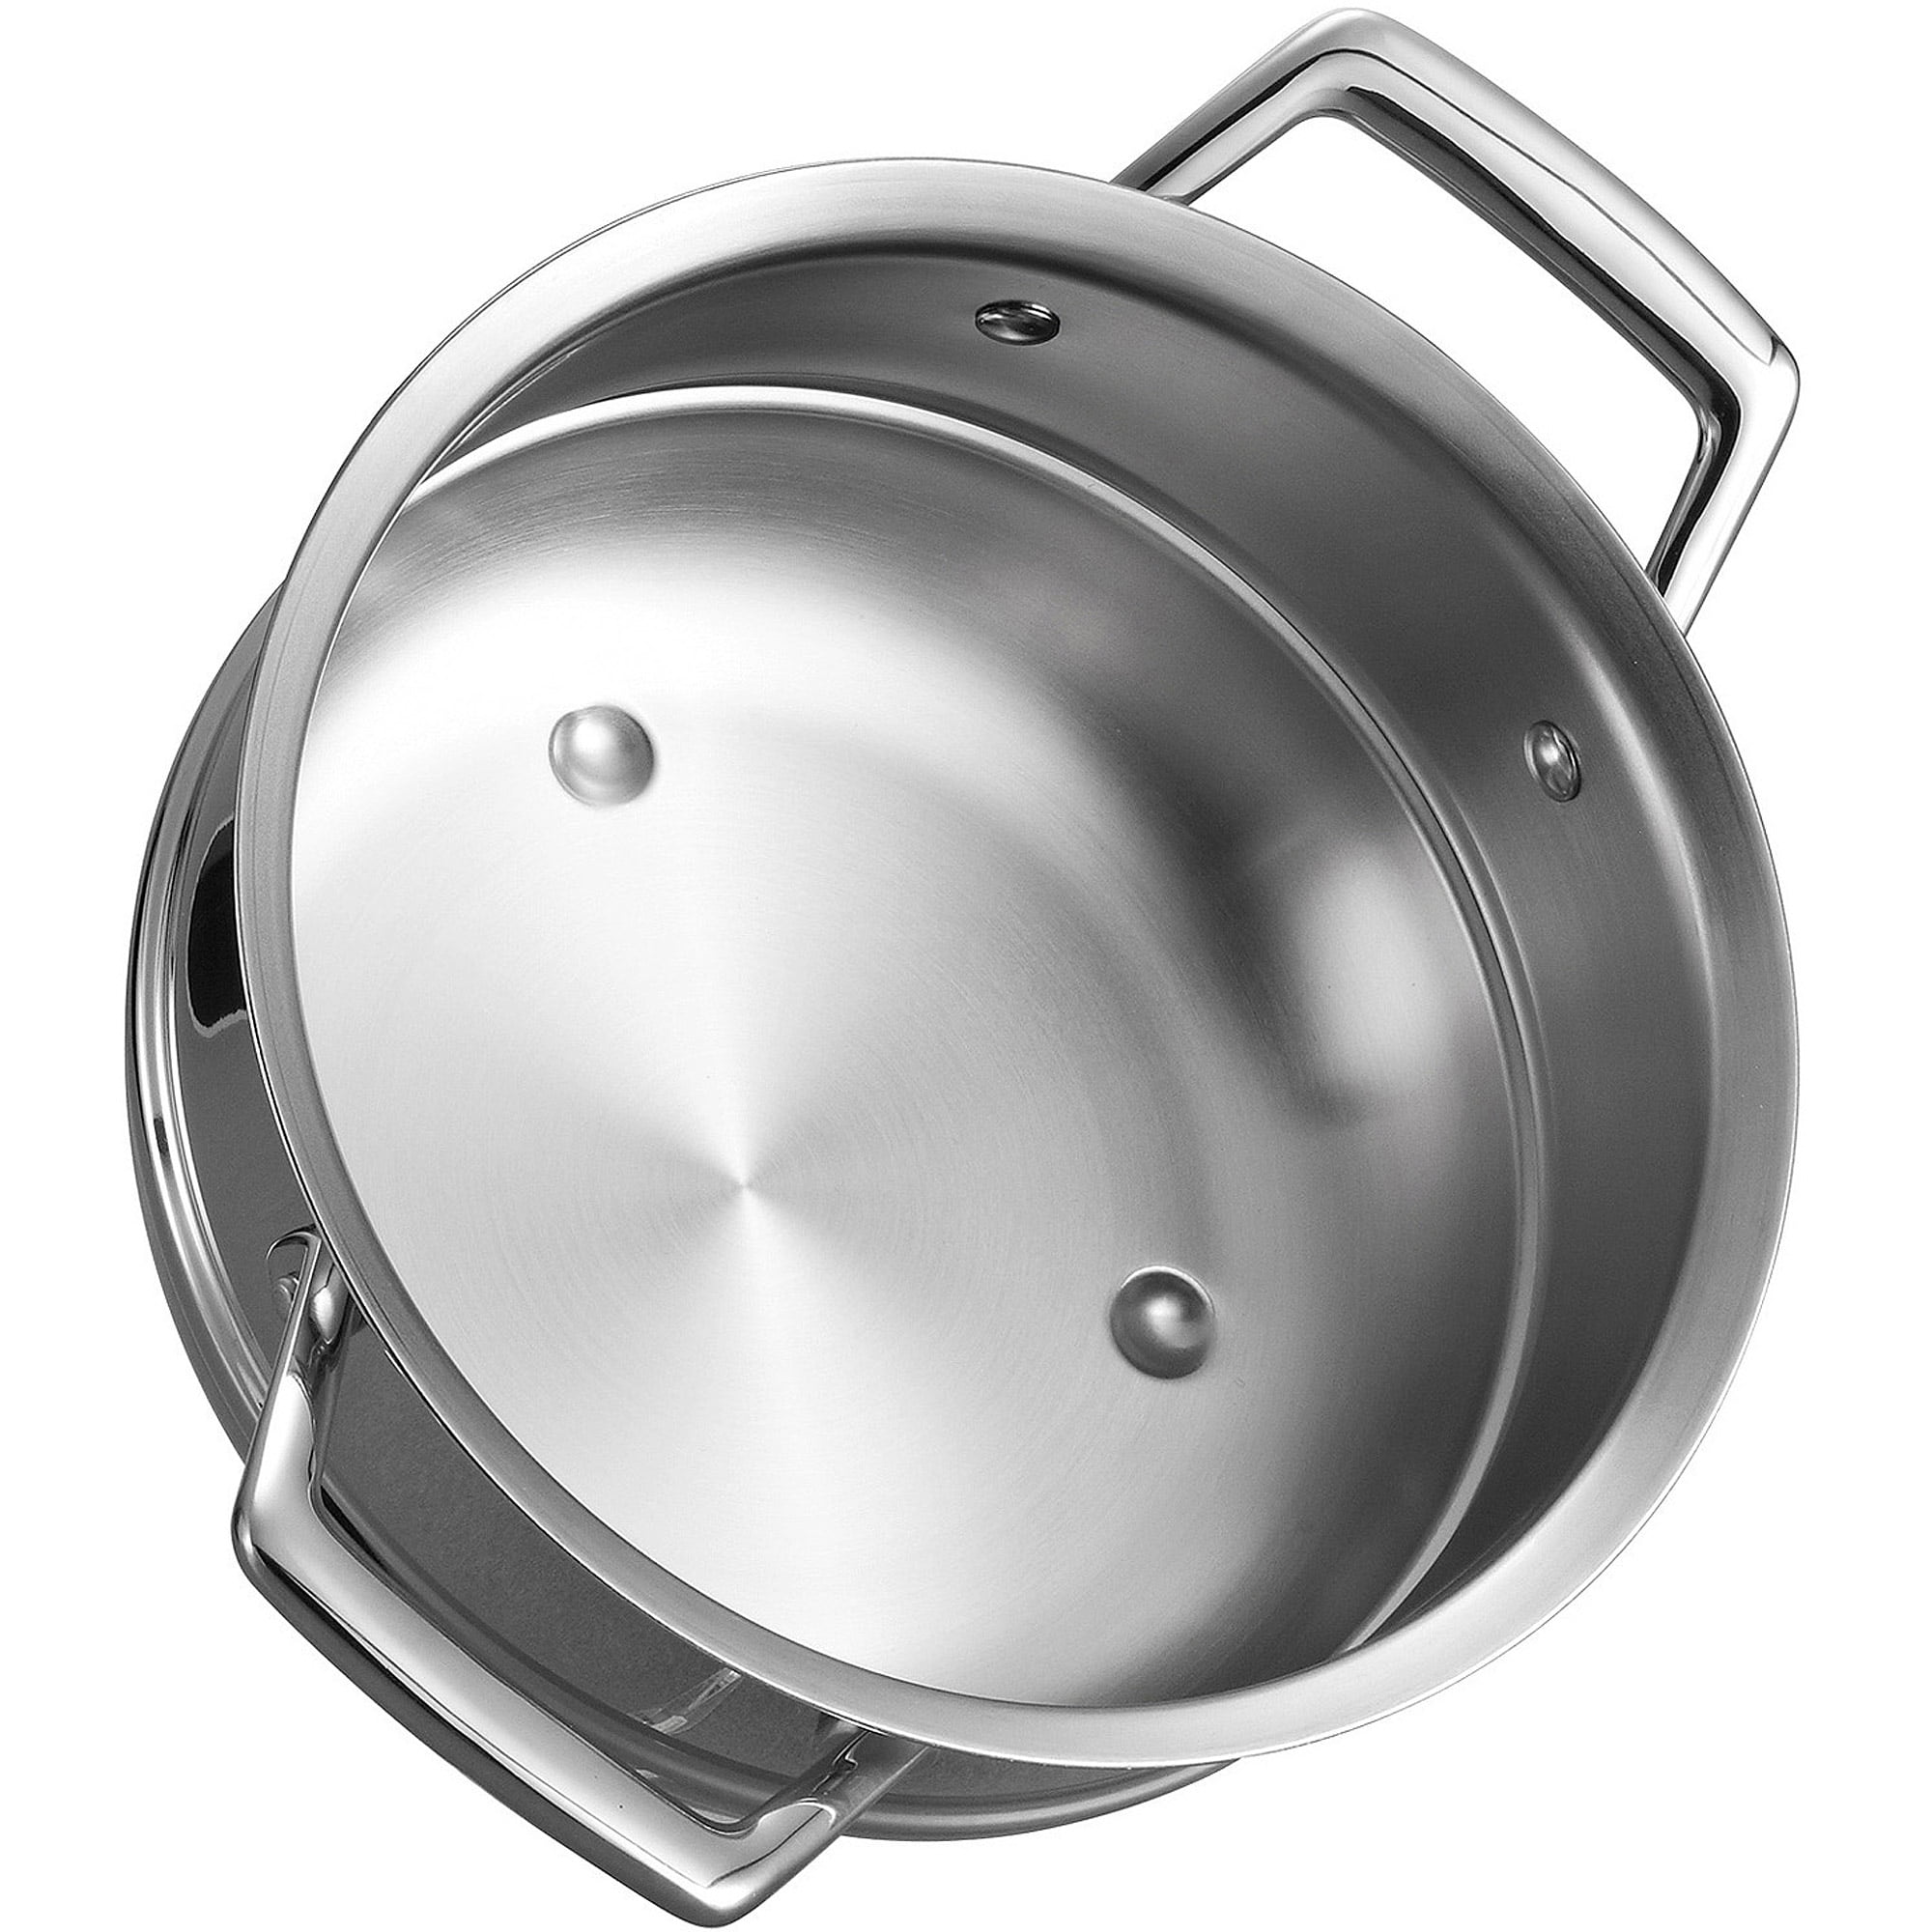  Tramontina 80101/013DS Gourmet Stainless Steel Steamer Insert,  3 Quart, Made in Brazil: Double Boilers: Home & Kitchen